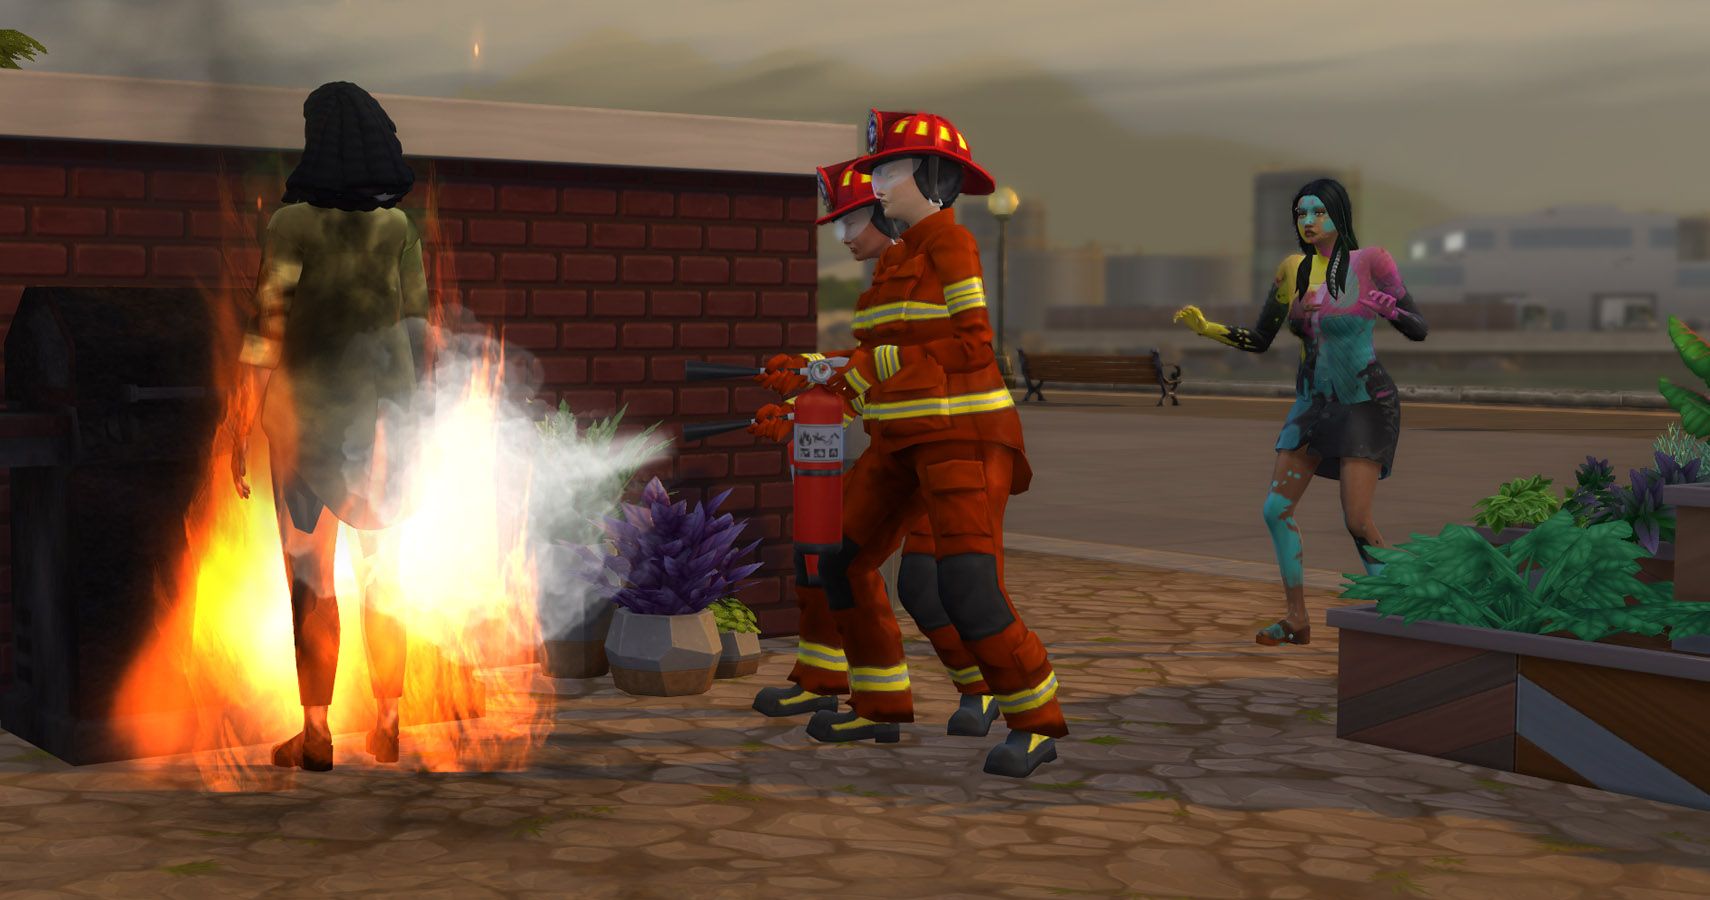 The firebrigade attending a sim on fire while another covered in paint panics.